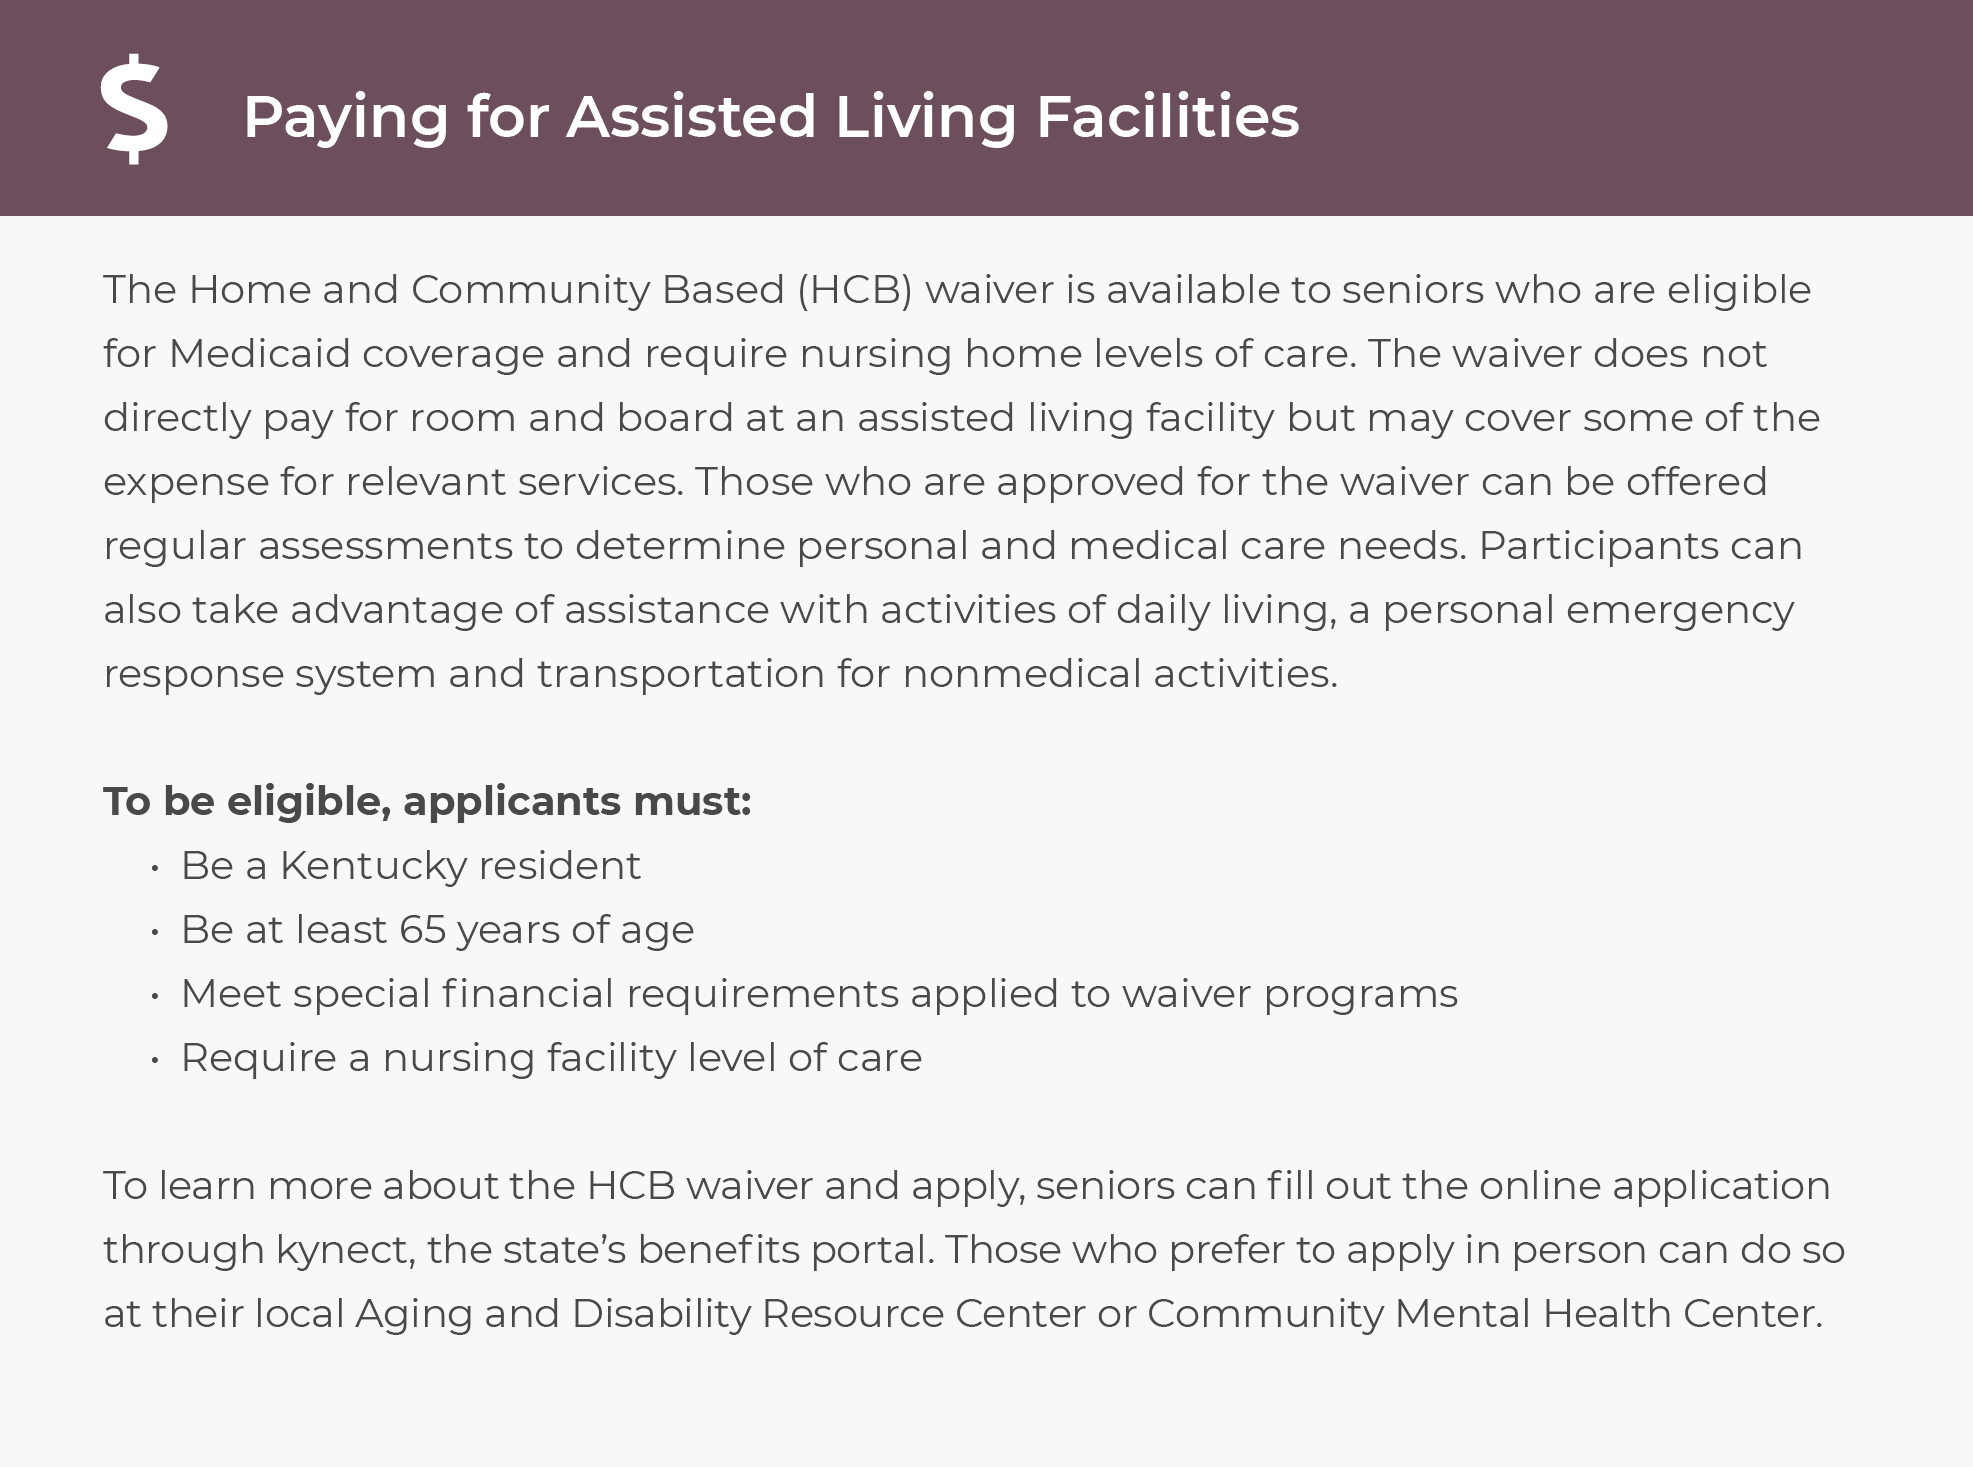 Paying for assisted living facilities in Kentucky